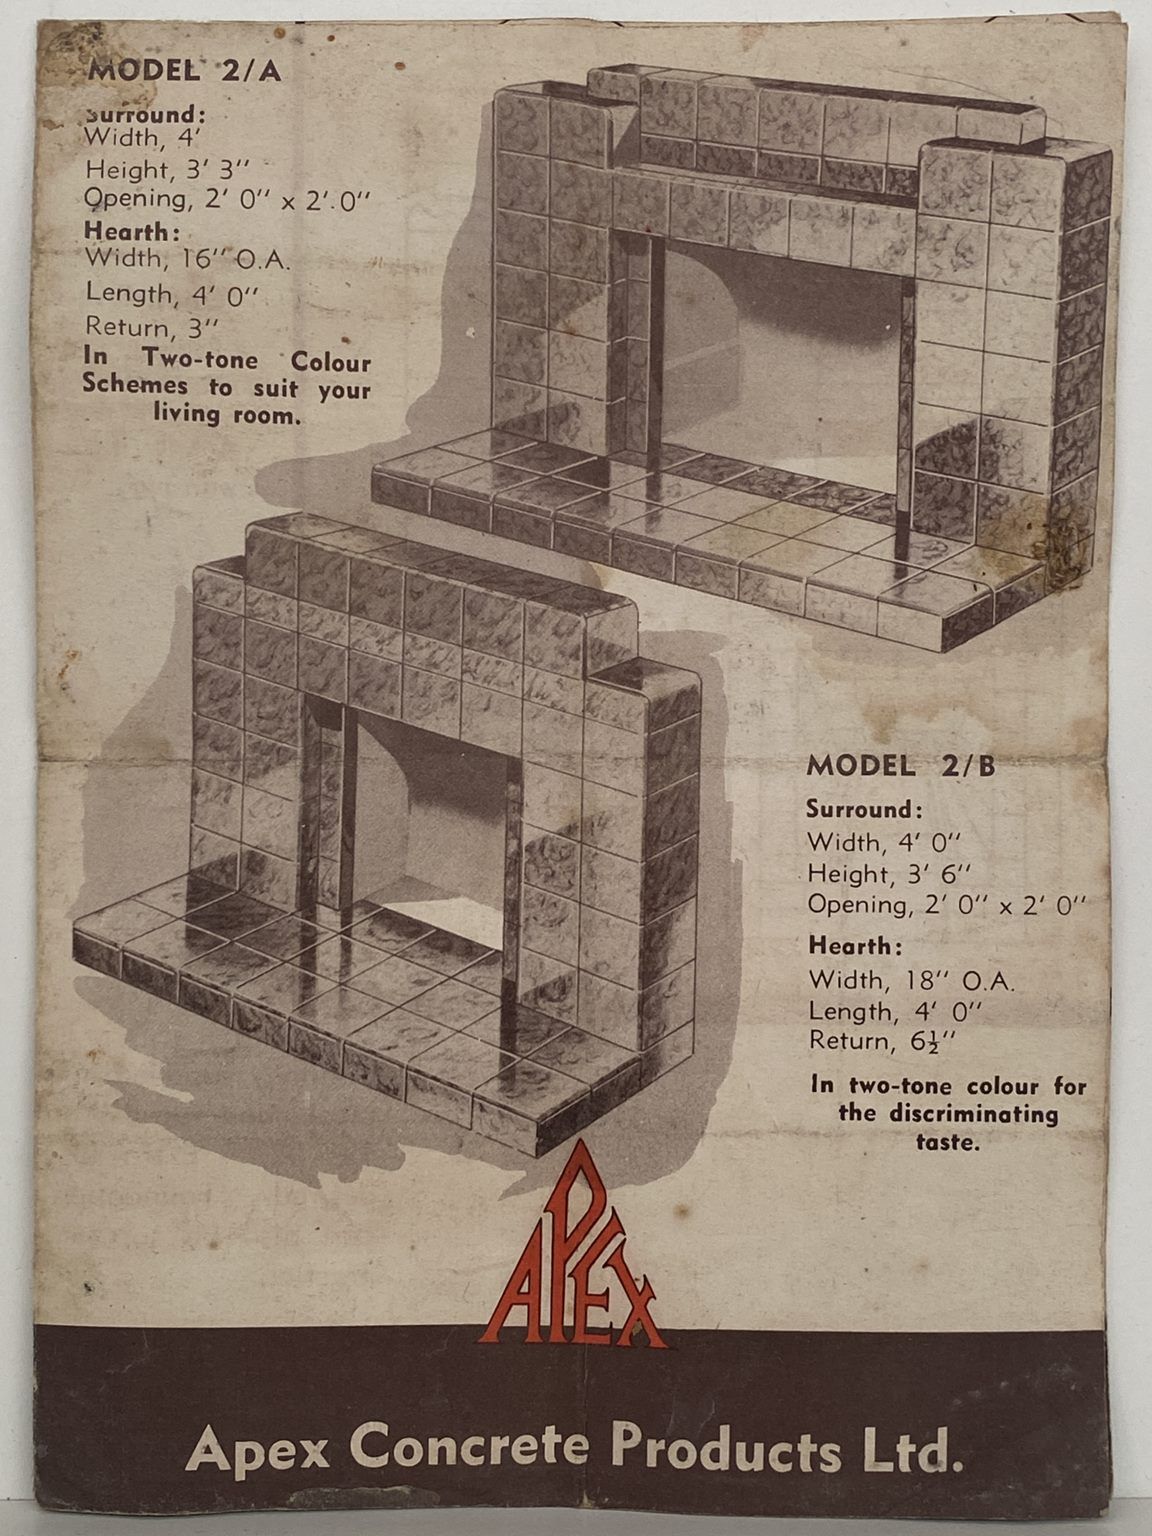 OLD BROCHURE: for Apex Concrete Products circa 1950s